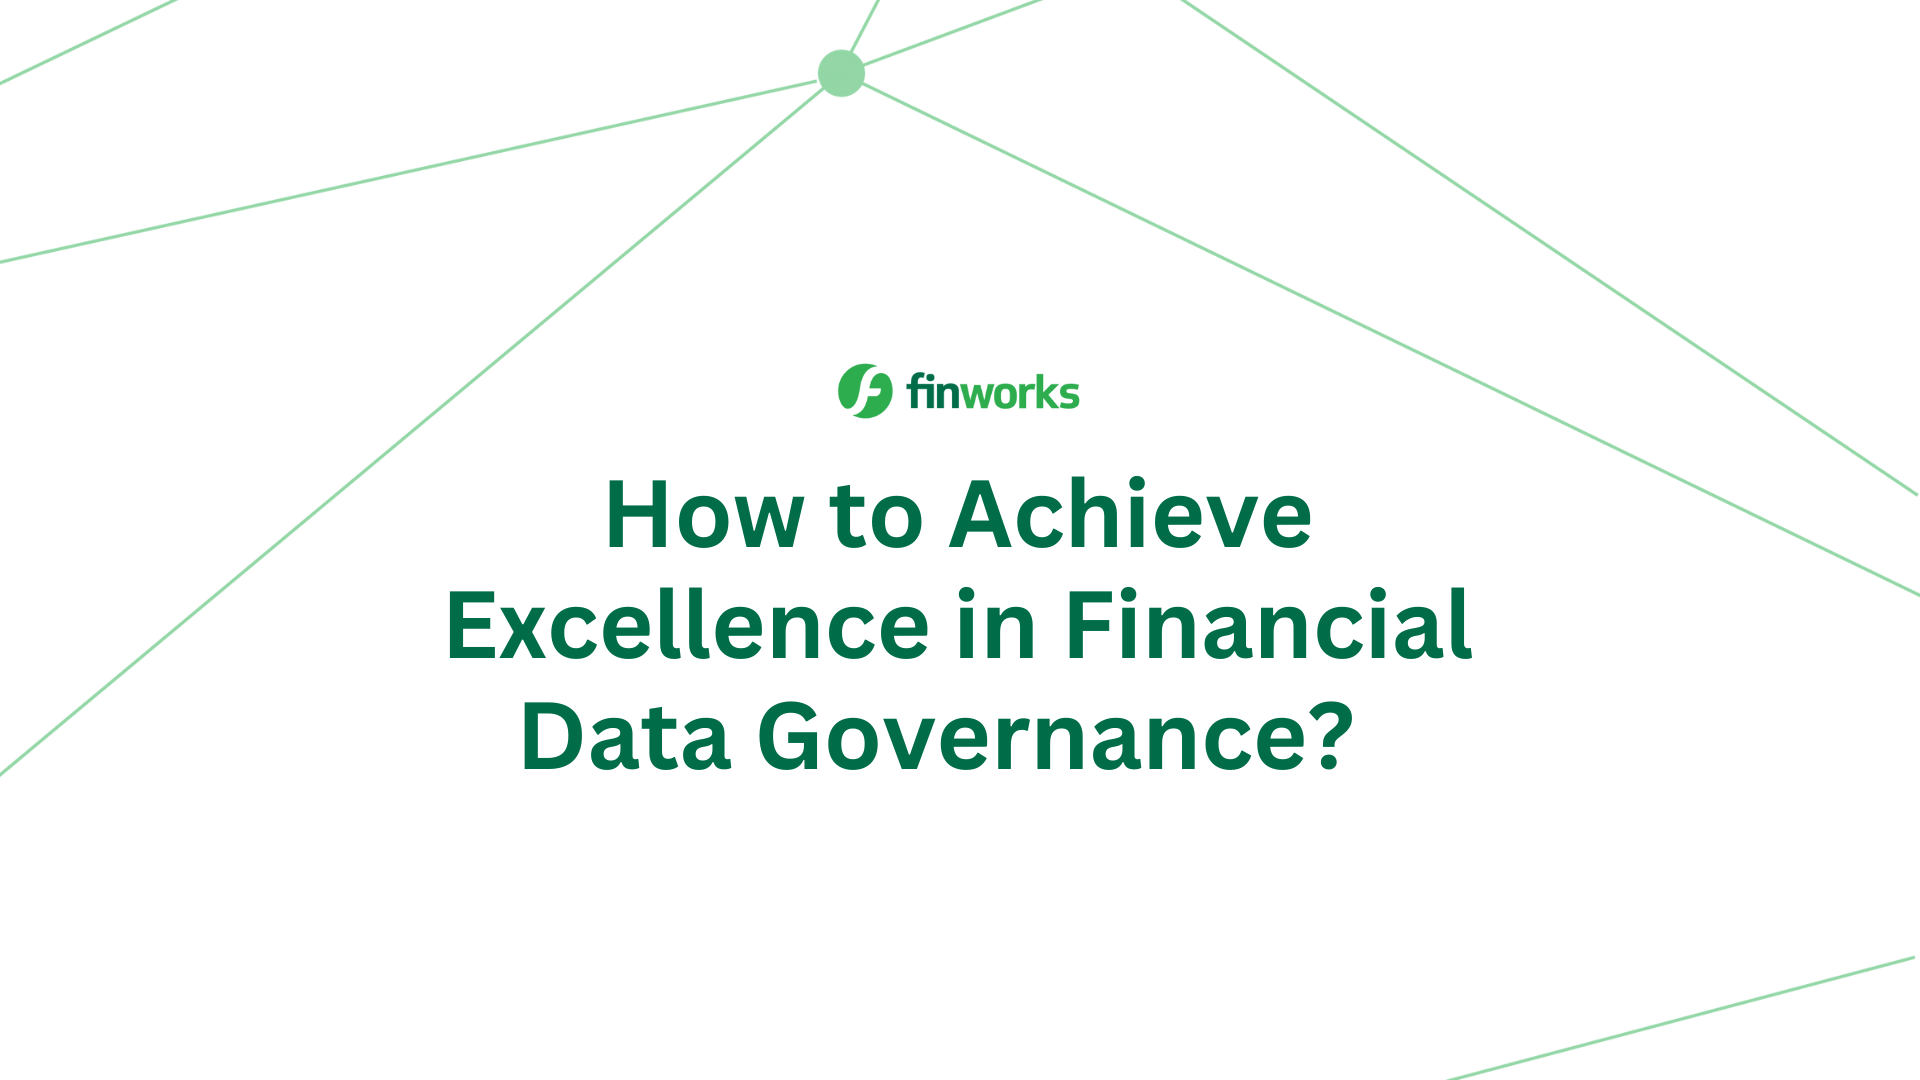 How to Achieve Excellence in Financial Data Governance?